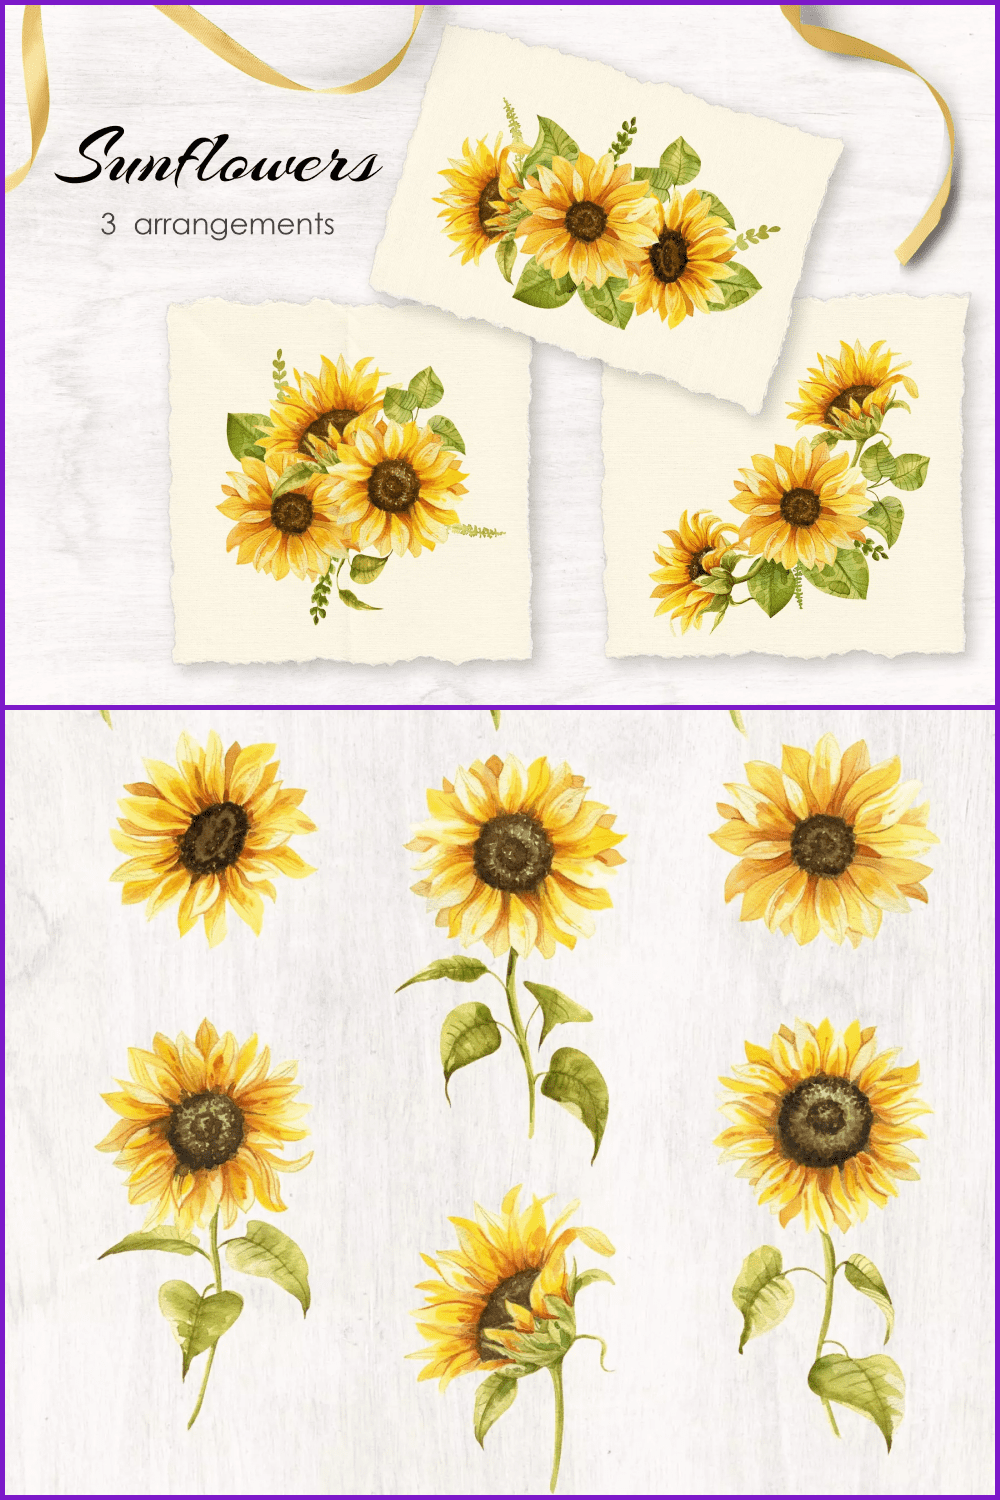 Few different sunflowers in combinations.